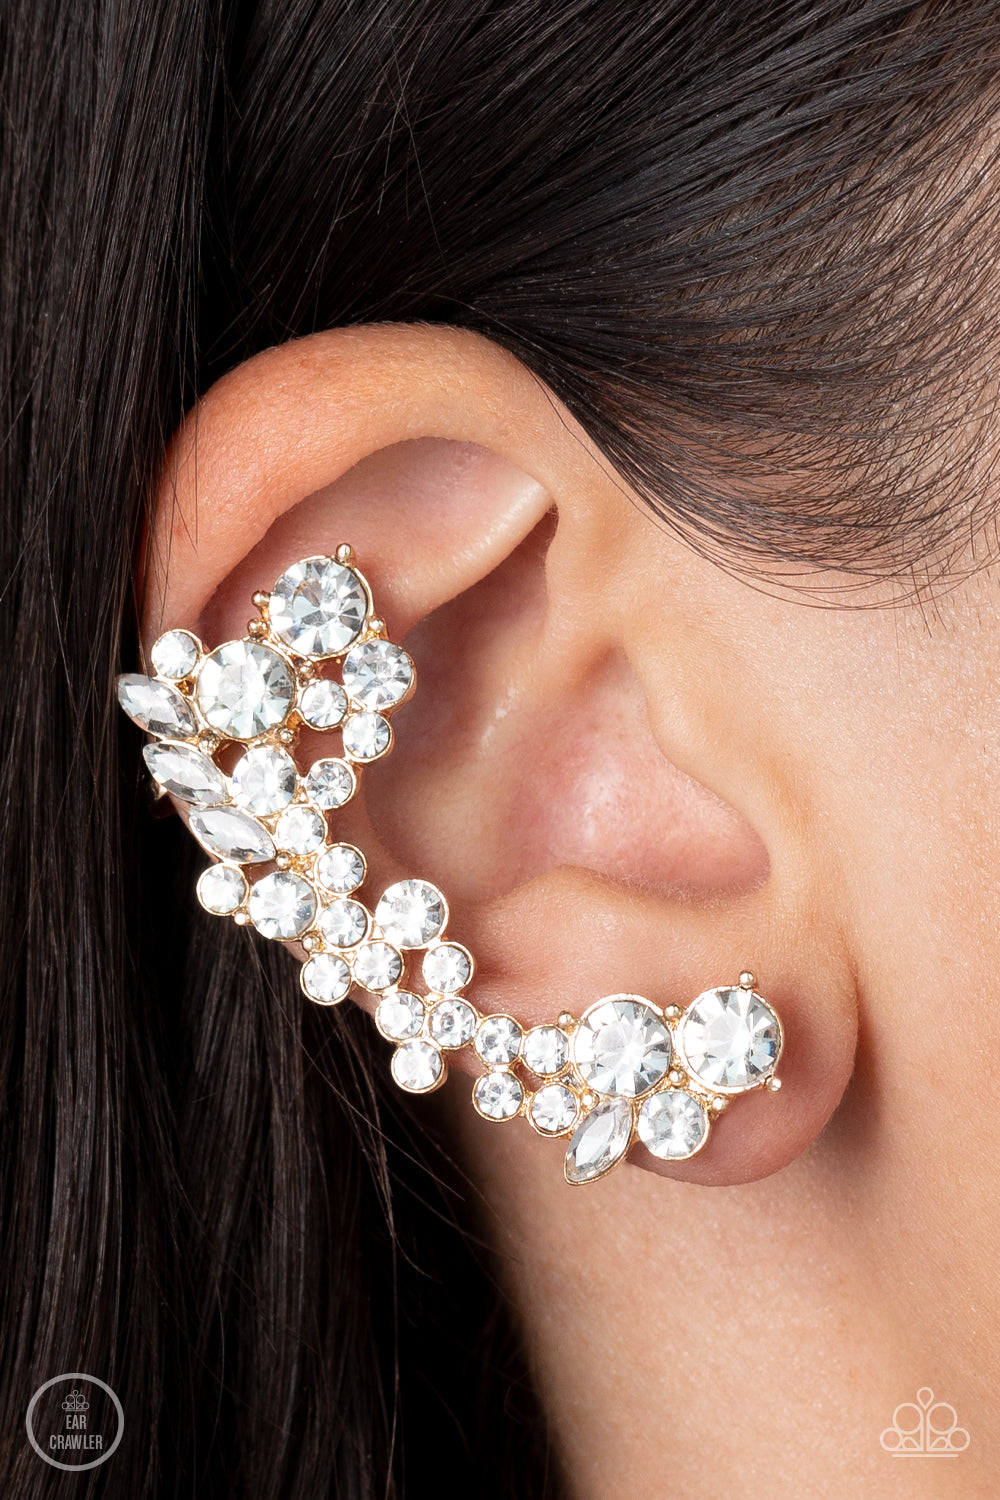 Paparazzi Astronomical Allure - Gold Earrings (Ear Crawlers)